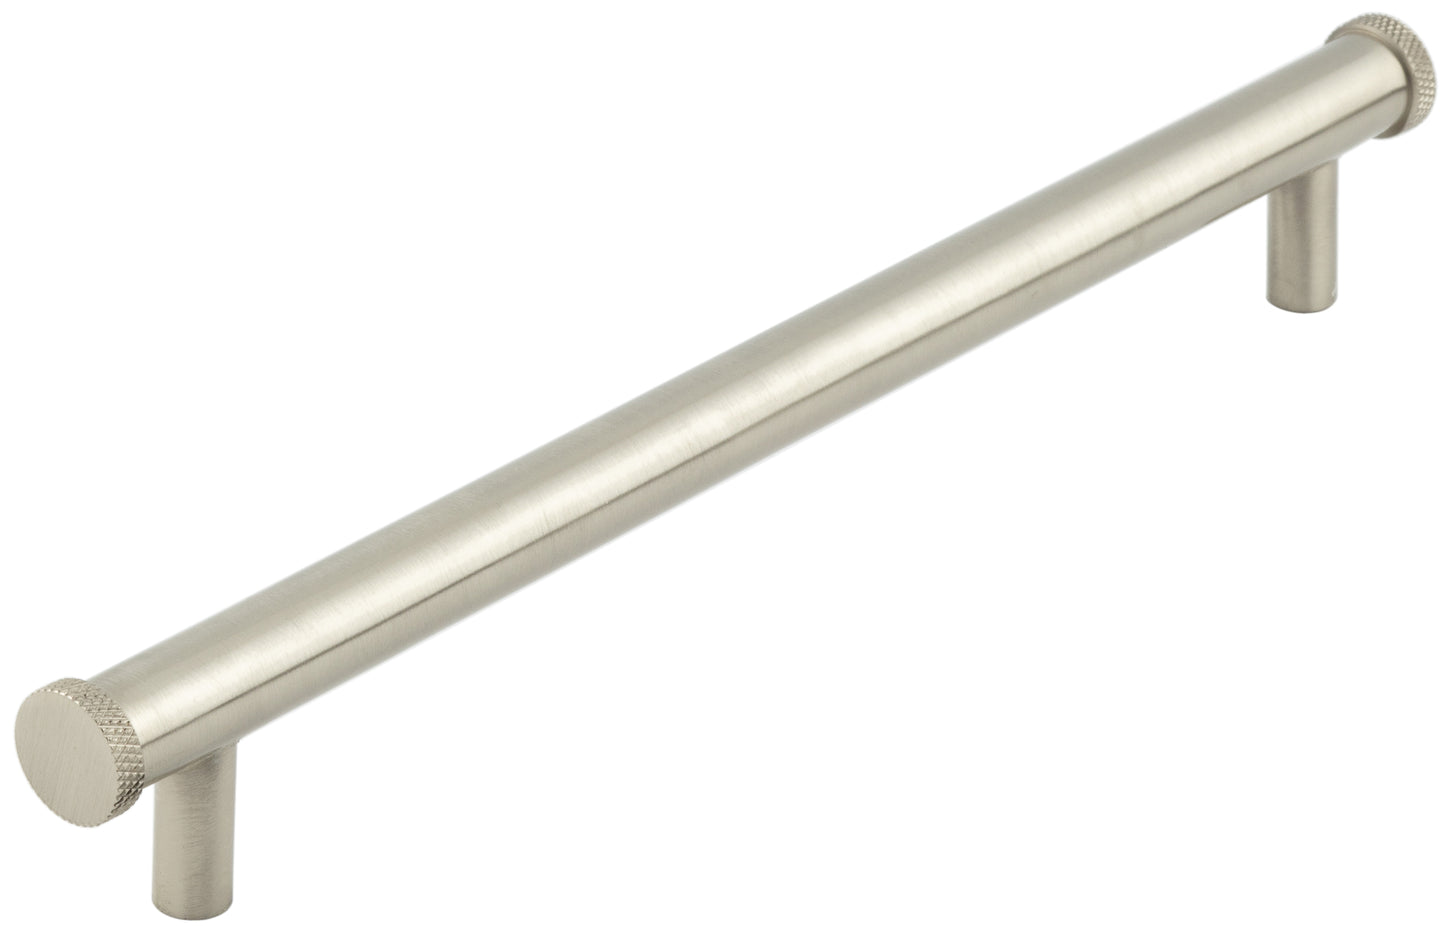 Hoxton Hoxton Wenlock Cabinet Handles 224mm Ctrs